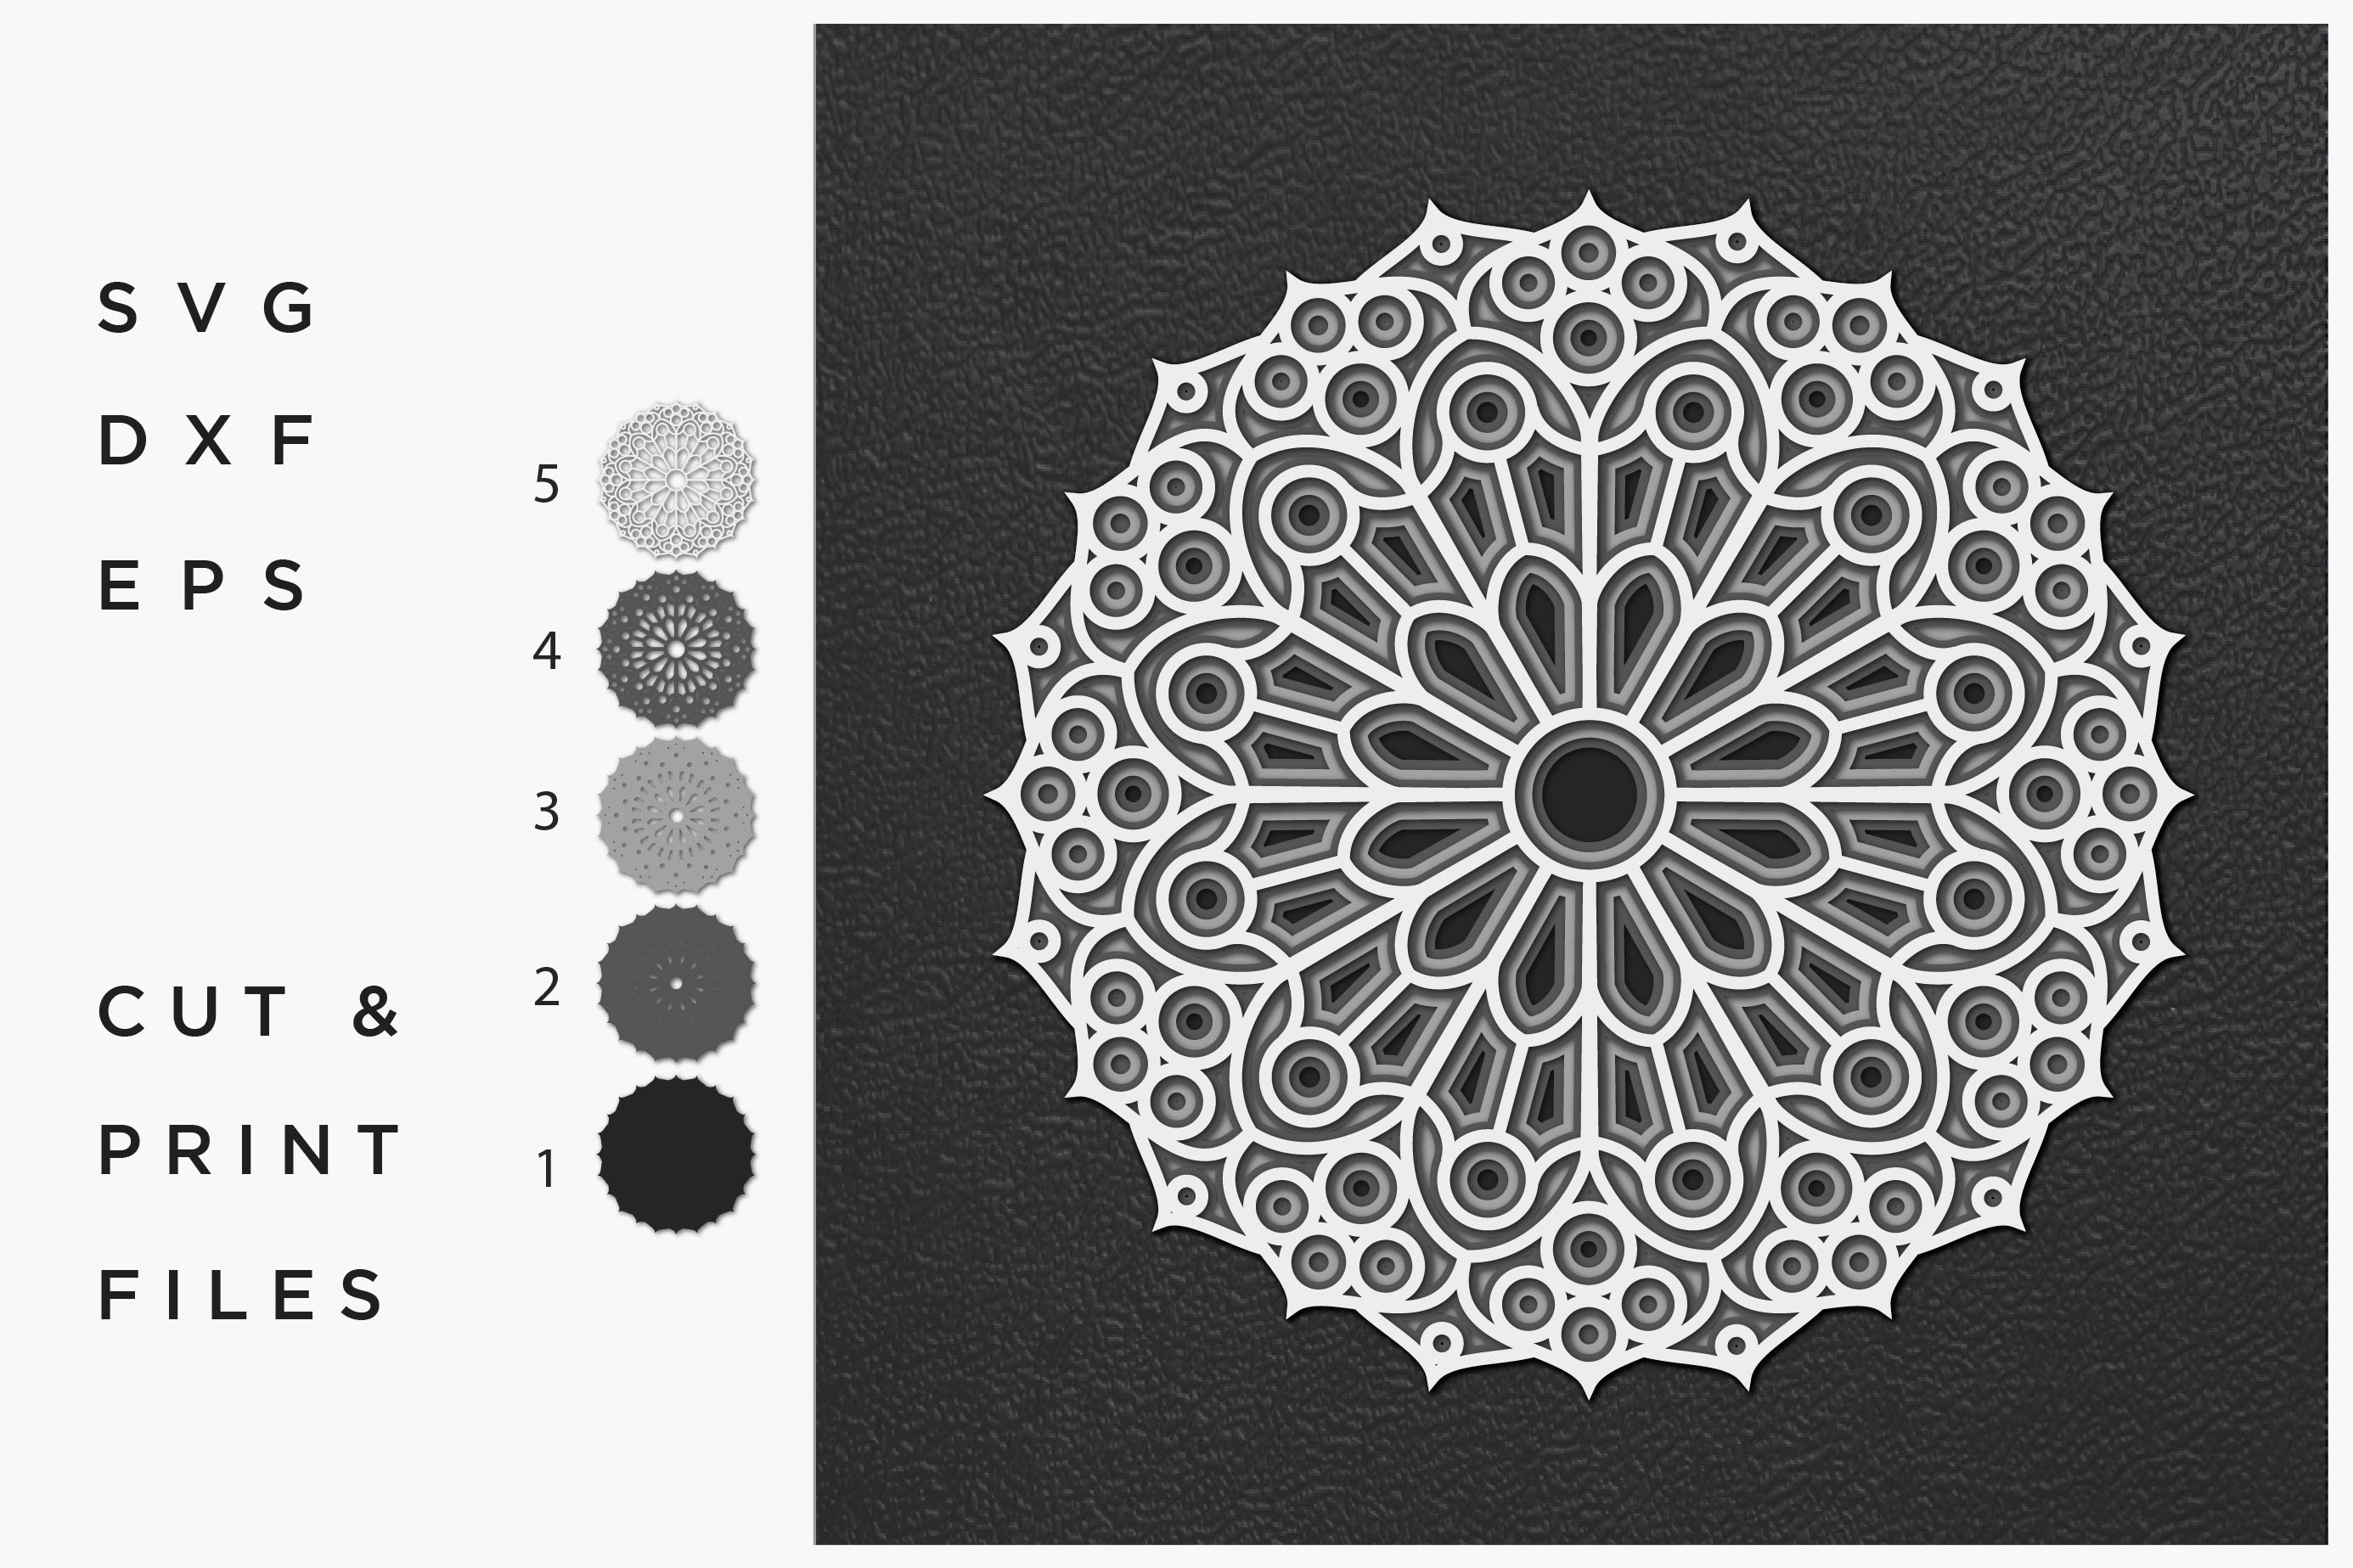 Download Layered 3D Mandala Svg Design - Layered SVG Cut File - Creative Free Fonts | Fonts for Your ...